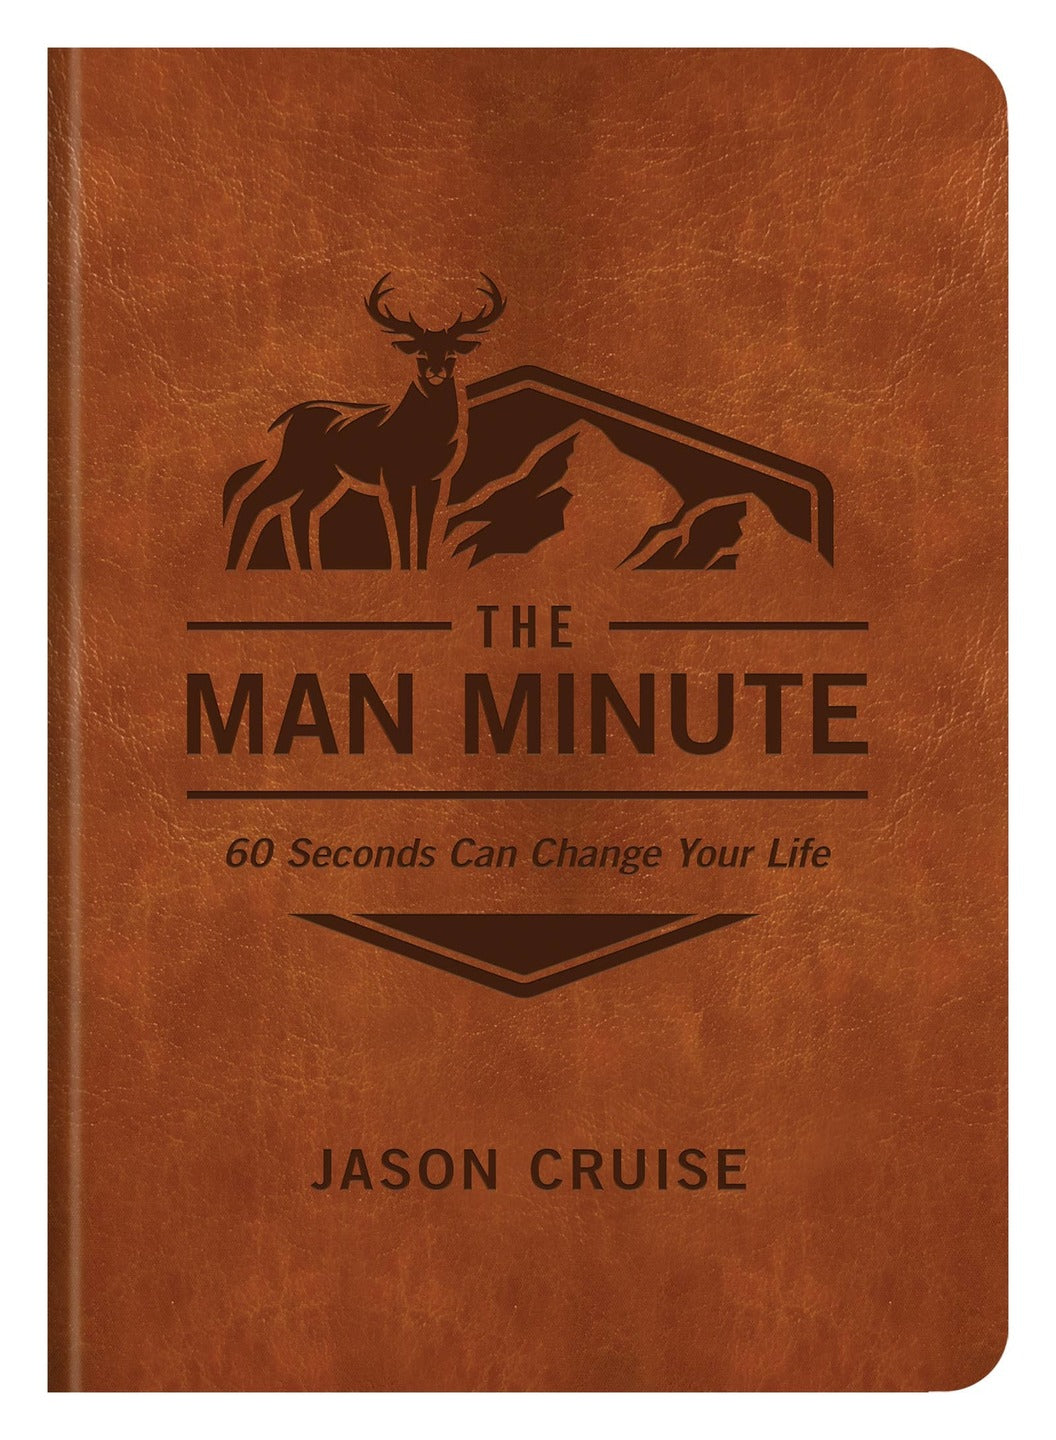 Barbour Publishing, Inc. - The Man Minute : 60 Seconds Can Change Your Life